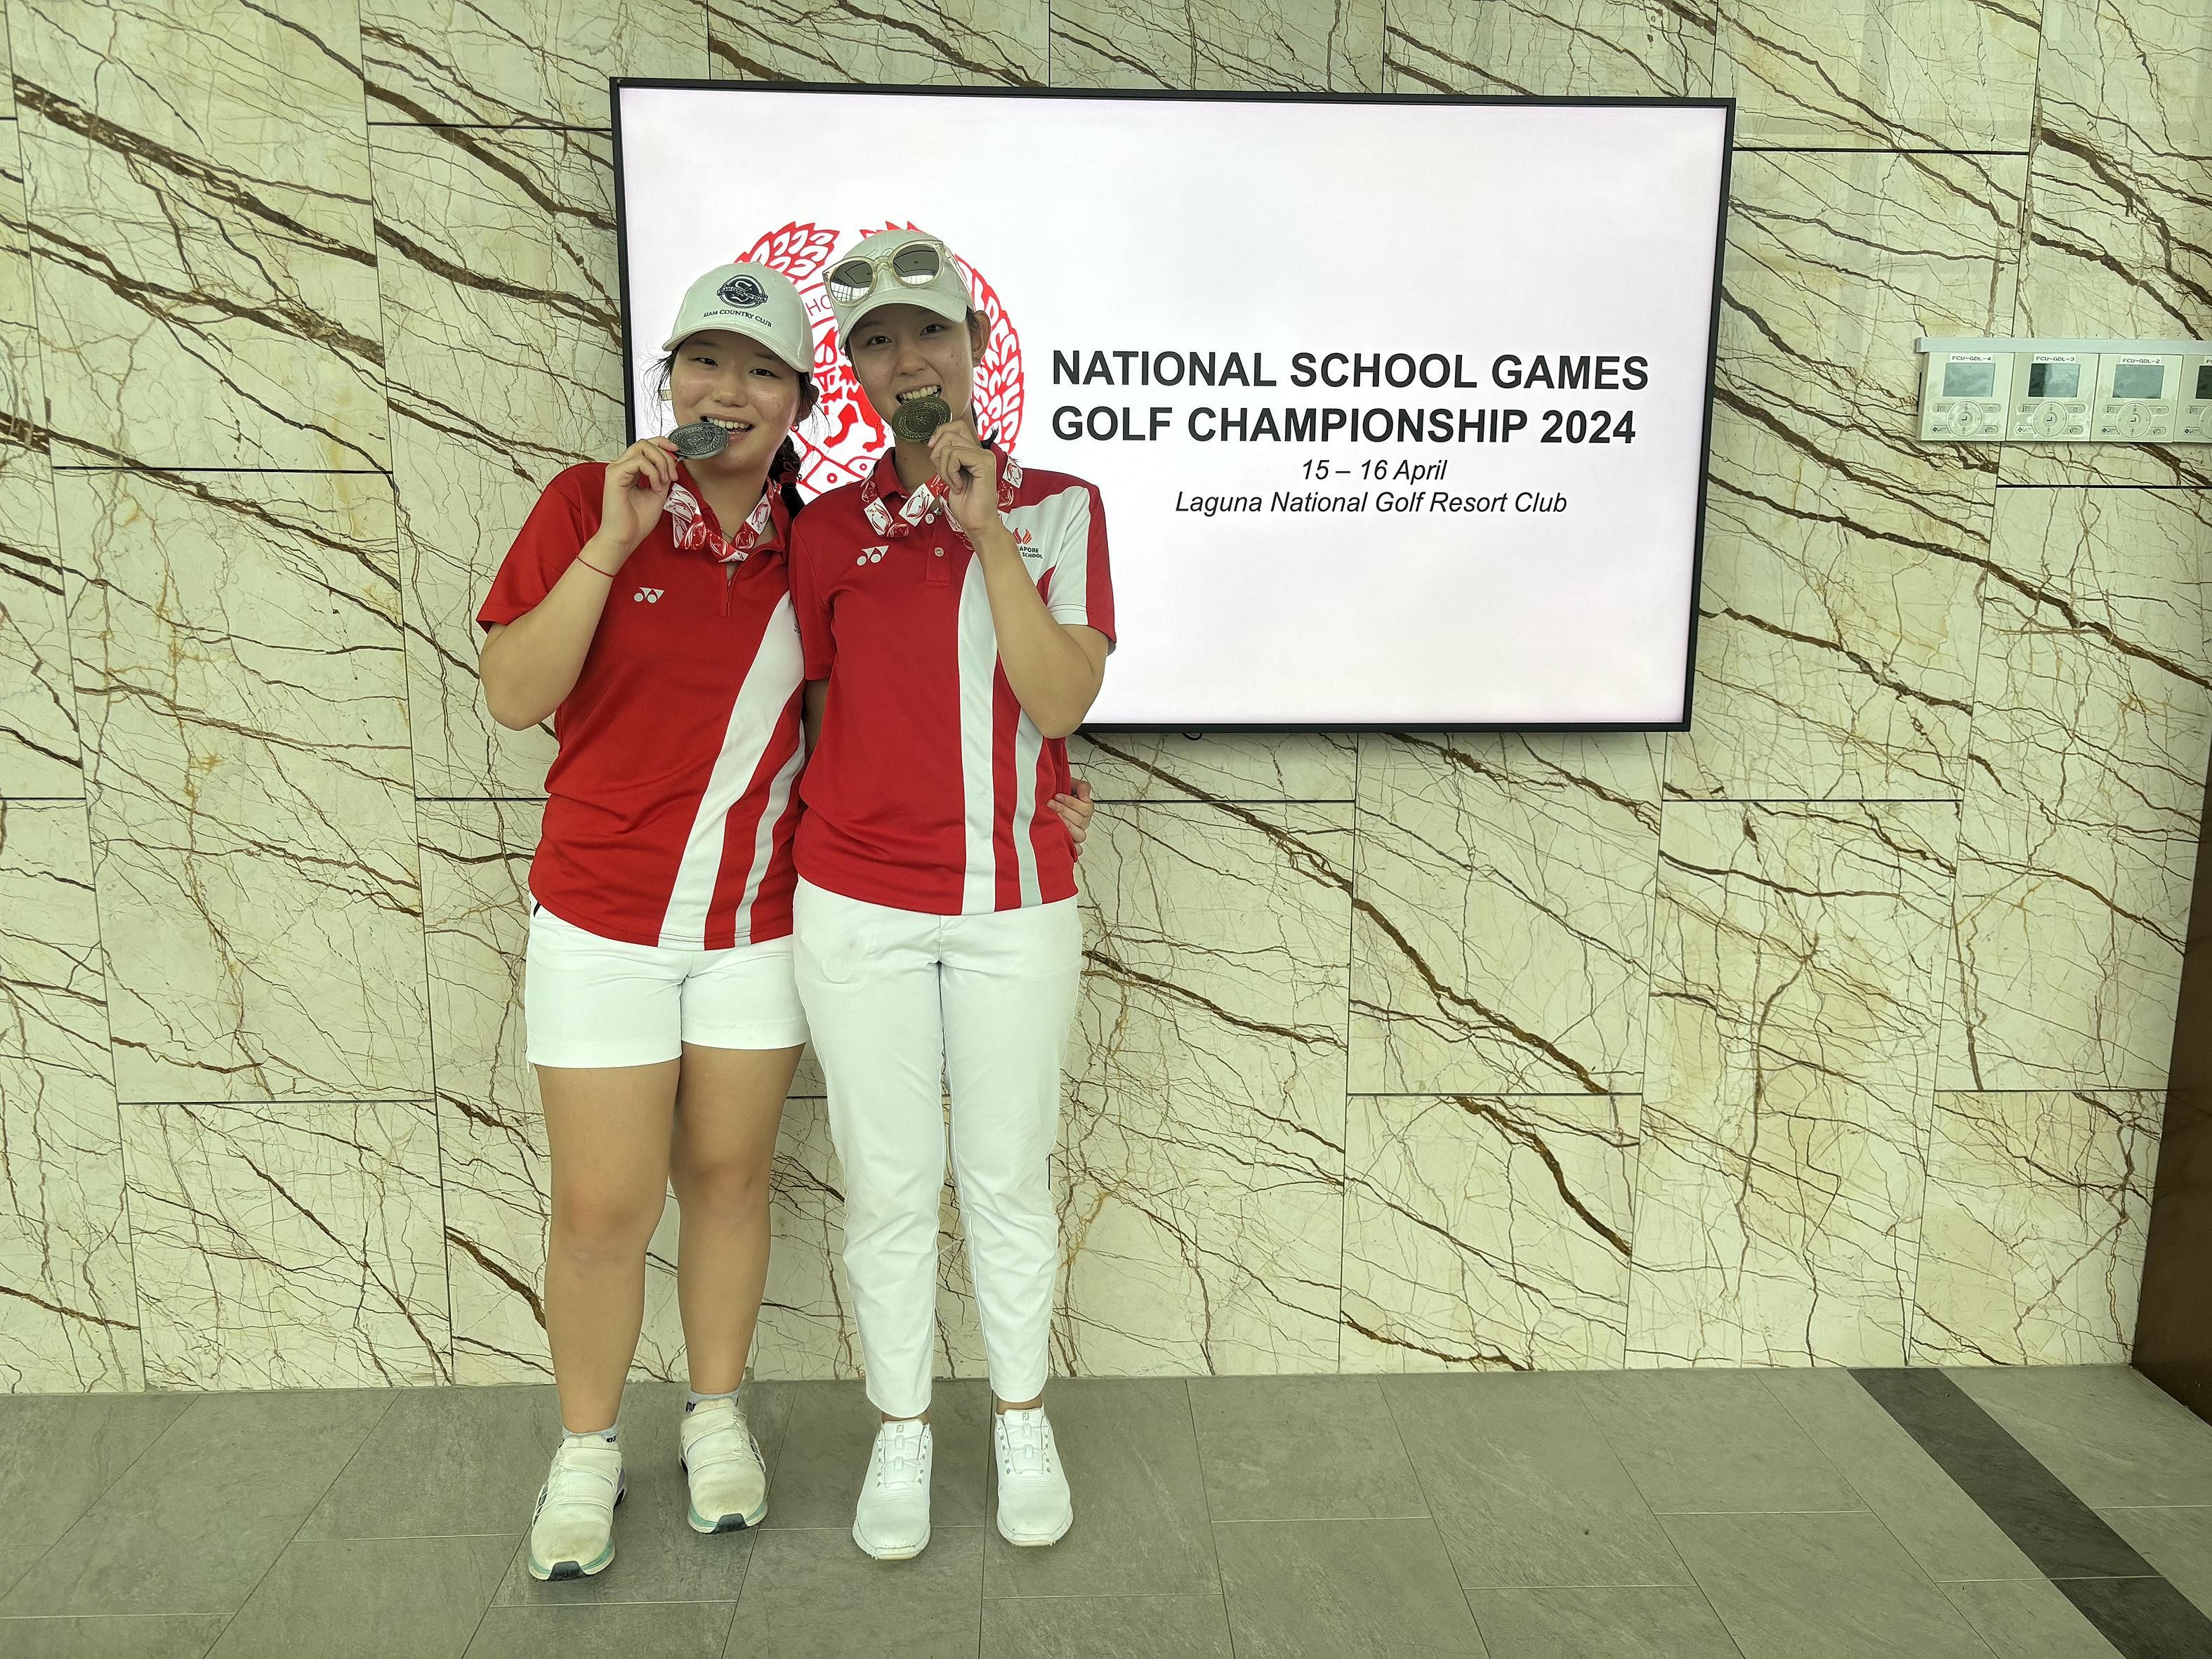 Inclement weather denies Ng sisters final day shoot-out at National School Games Golf Championships